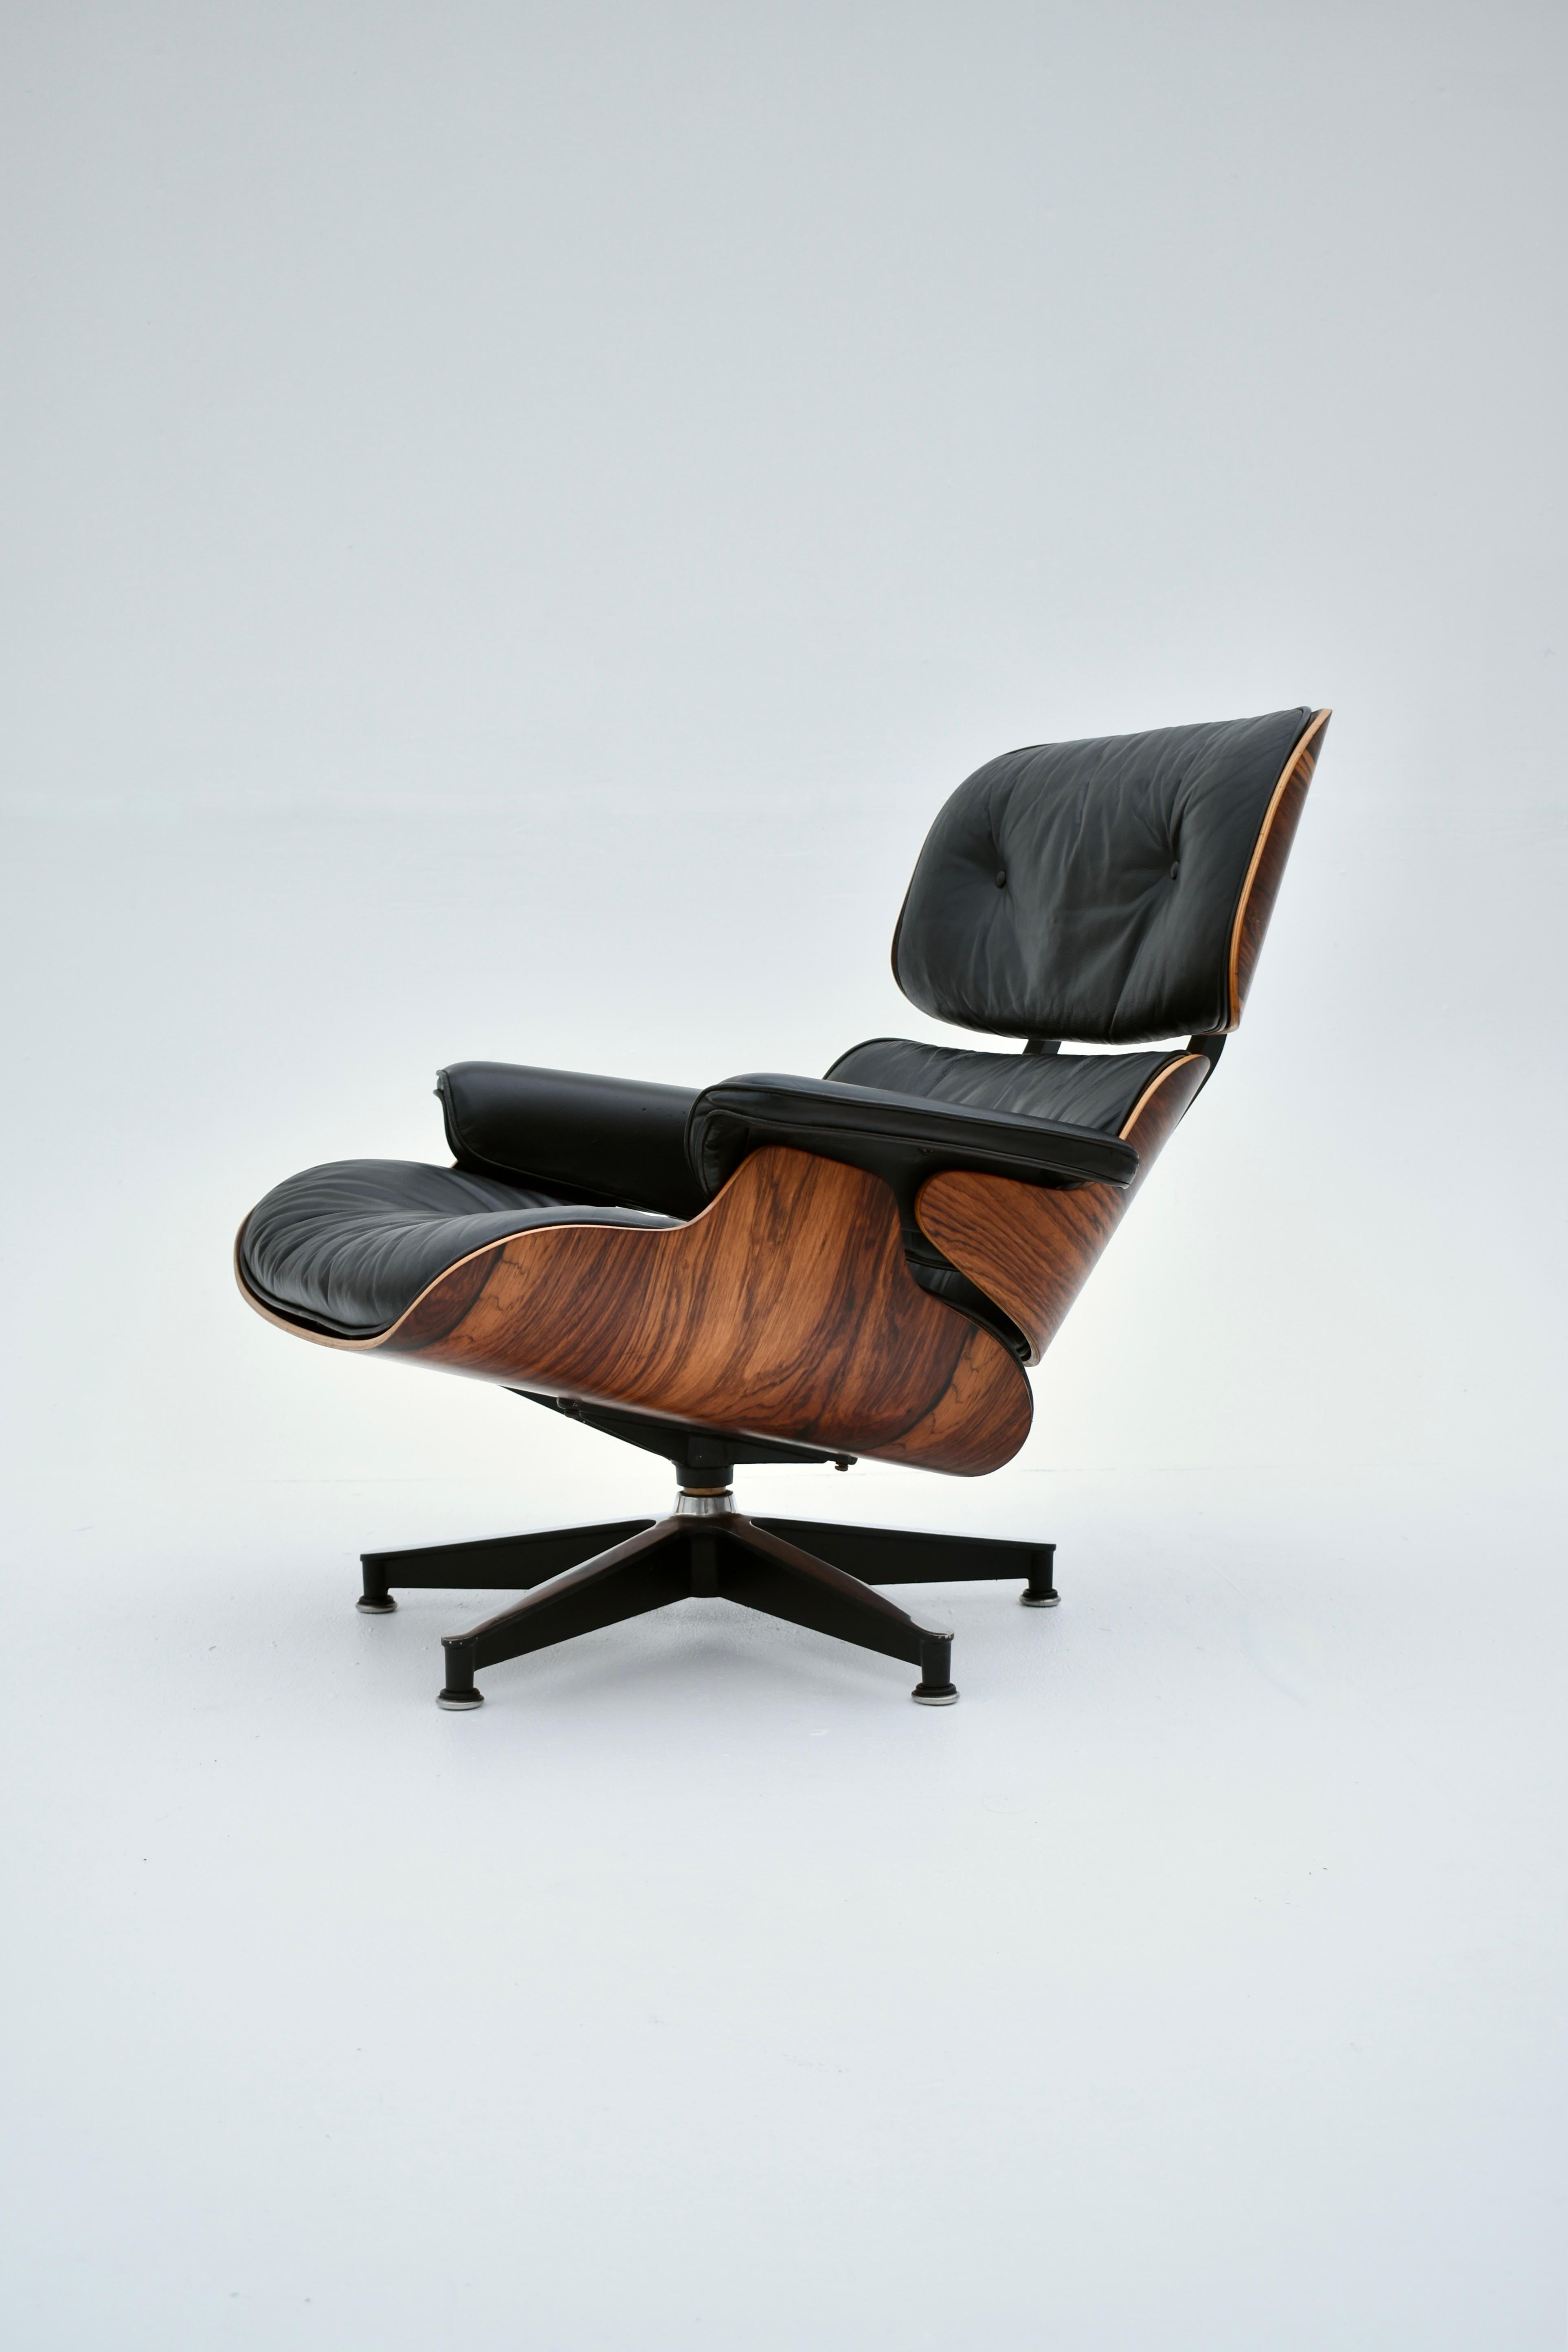 Original Eames Lounge chair produced by Herman Miller. This is what many would describe as a second generation chair as it features cushions filled with a mix of feather down and latex. Later chairs produced after 1971 featured foam cushion.

The